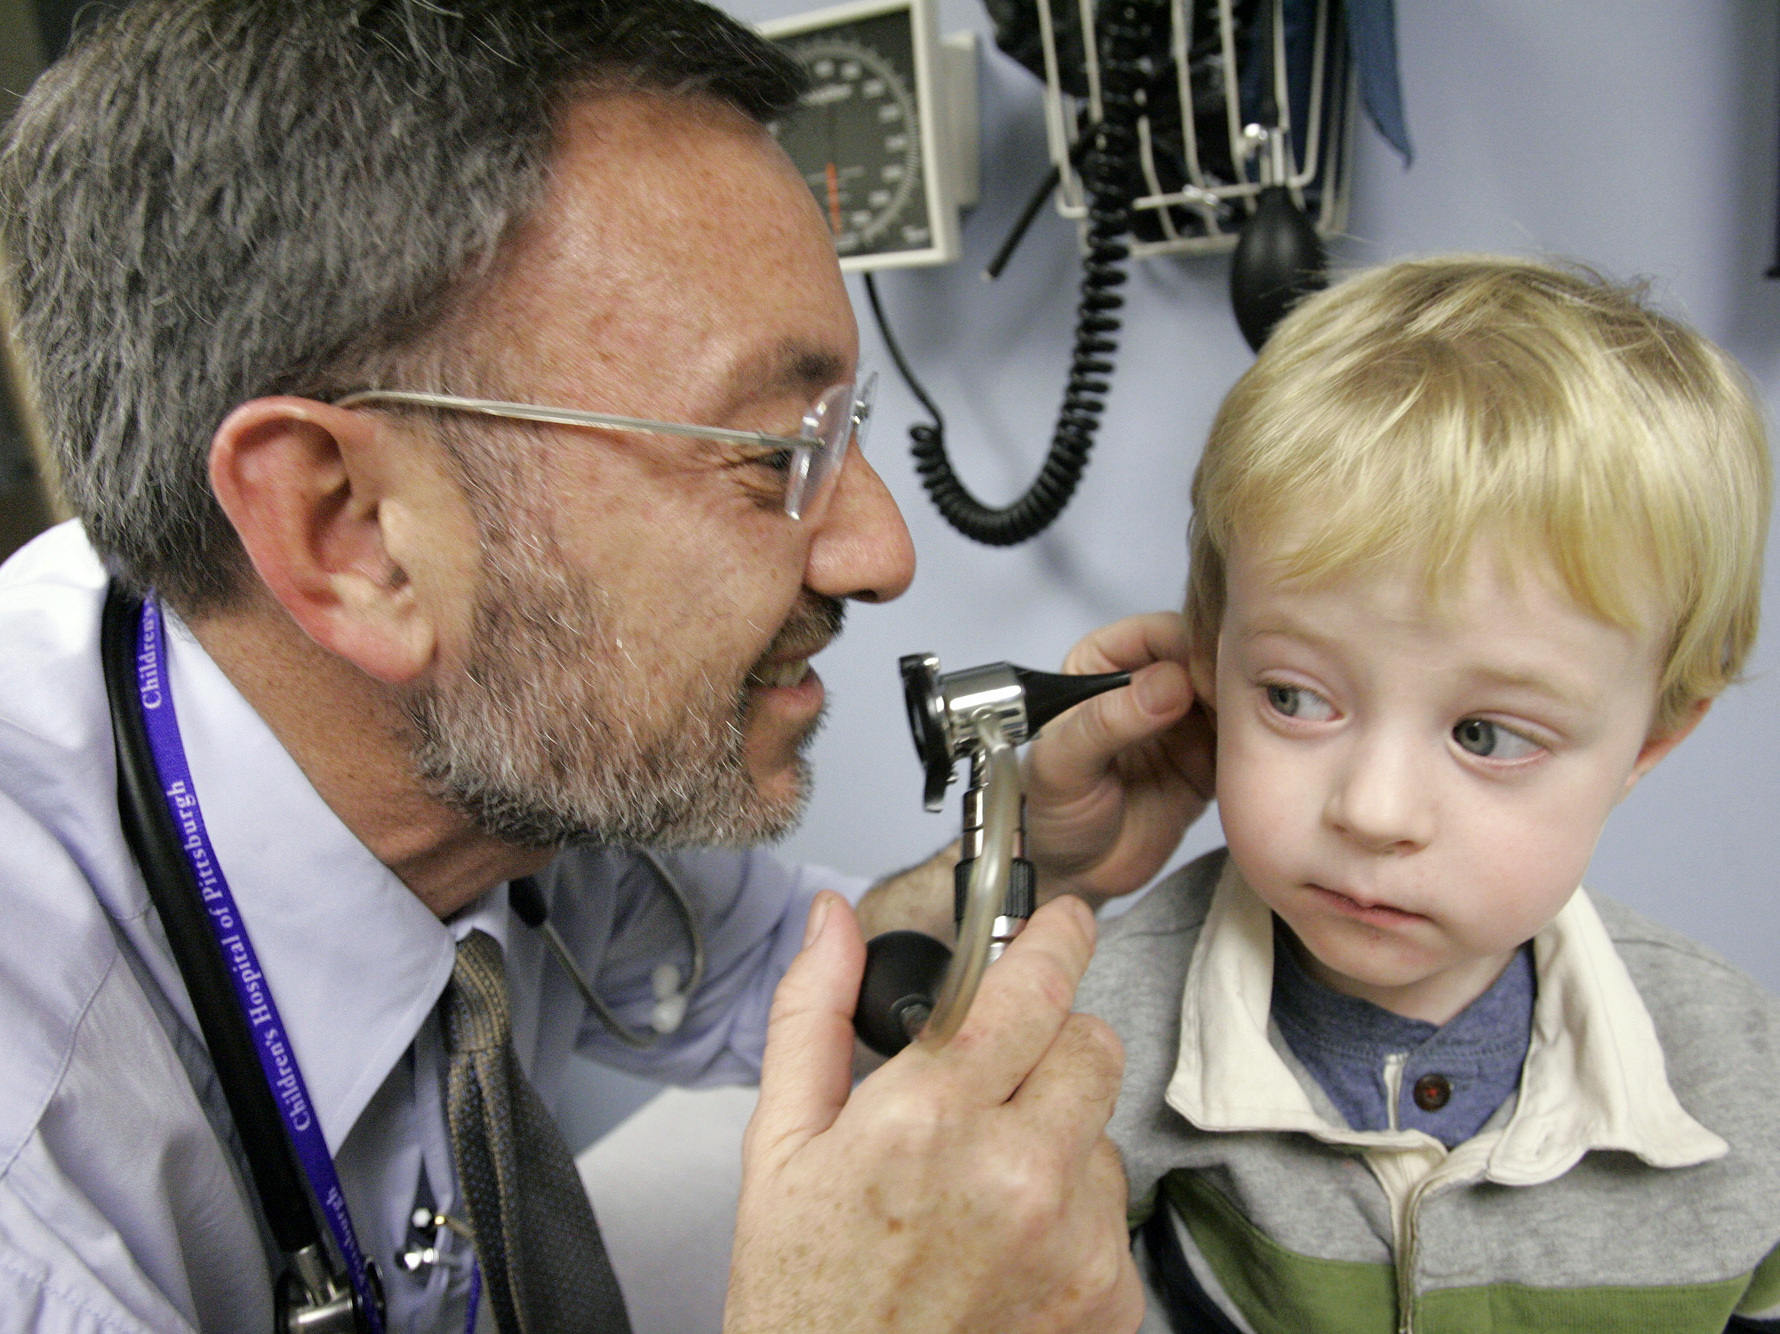 are antibiotics really necessary for children with ear infections